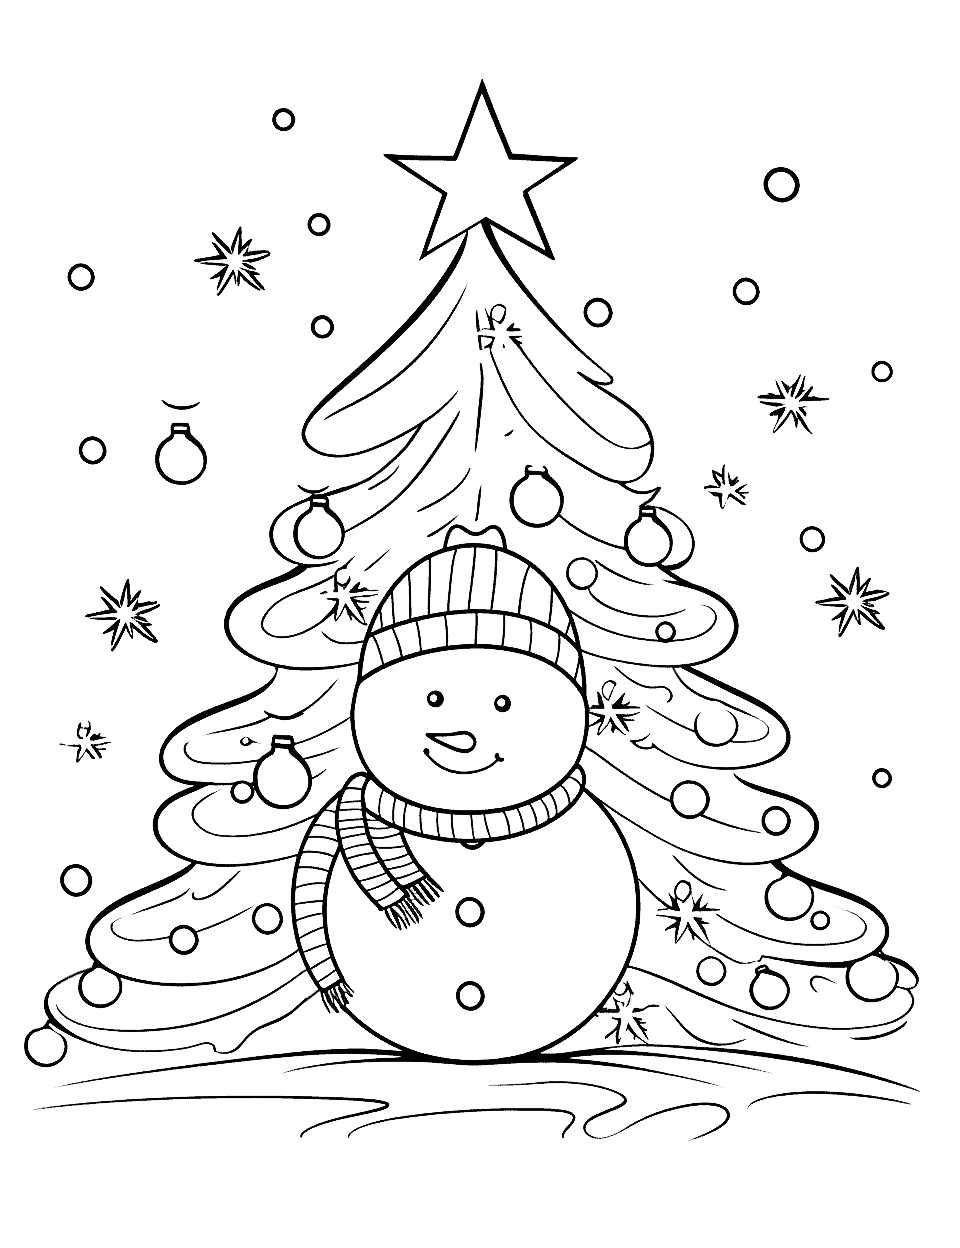 Large Christmas Tree Winter Coloring Page - A big, detailed Christmas tree with decorations waiting to be colored in.